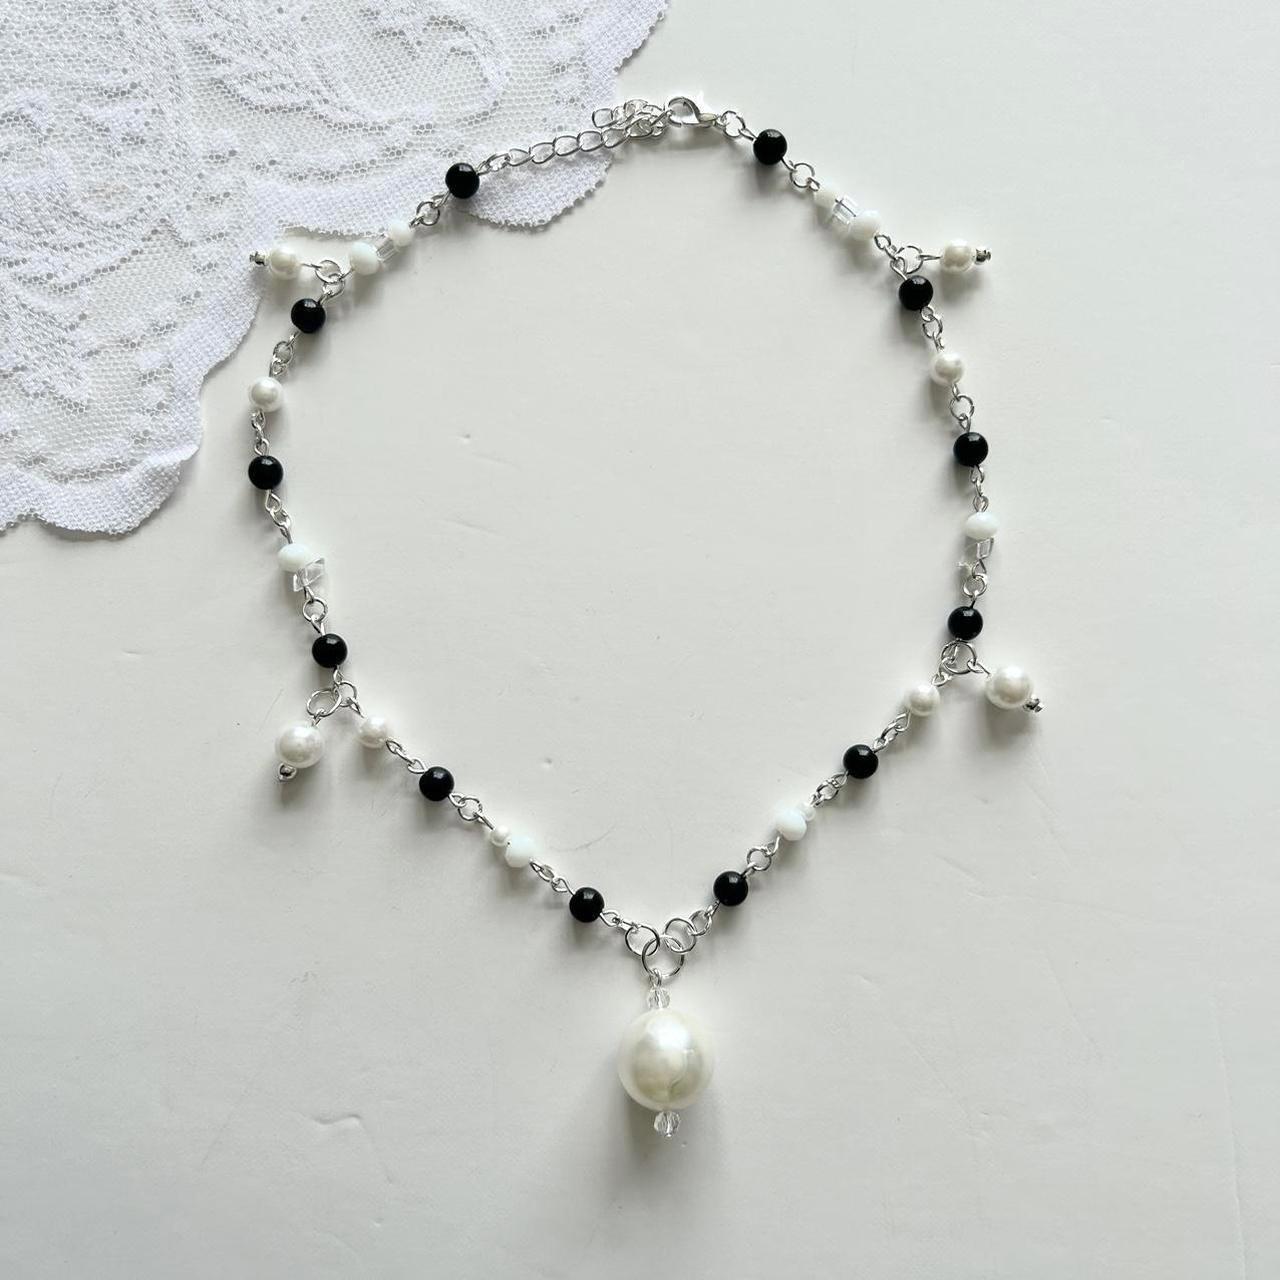 Handmade black and white silver bead necklace with... - Depop